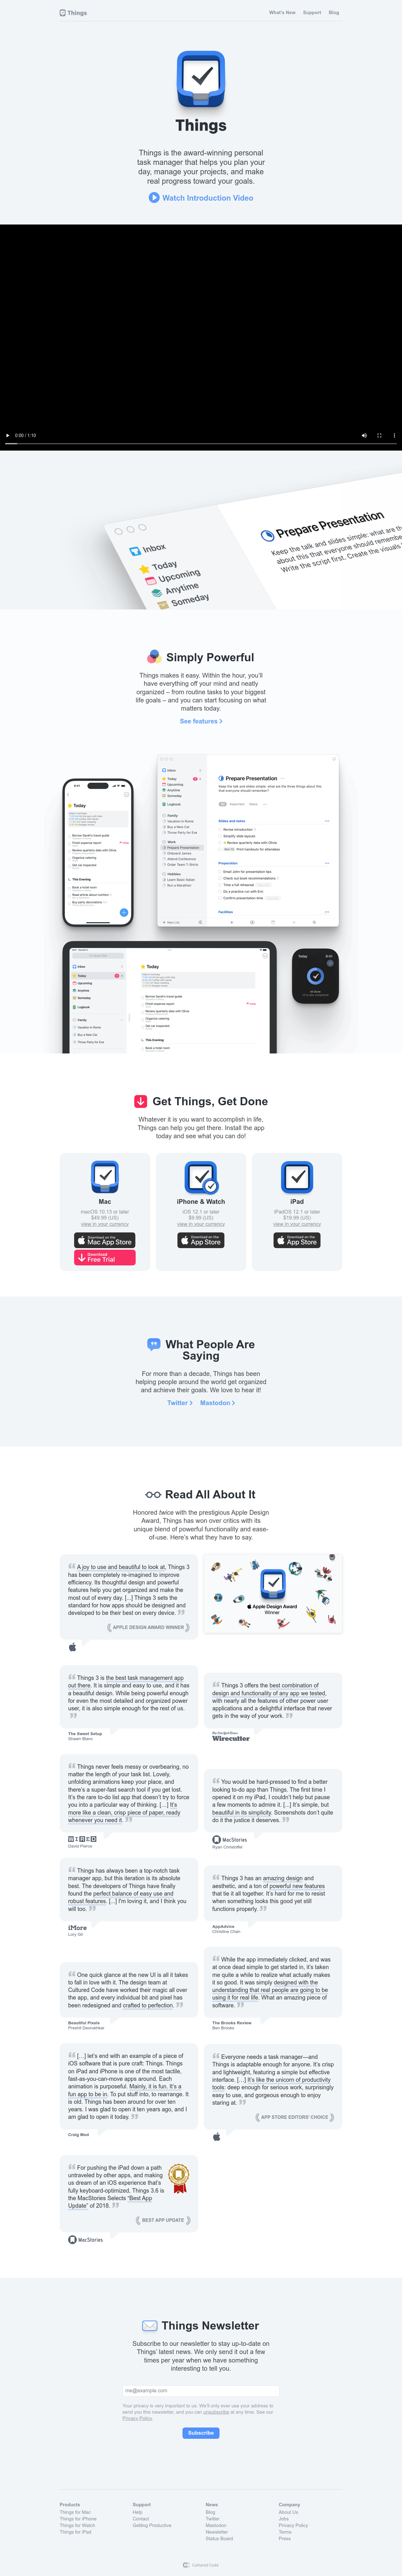 Full page screenshot of https://culturedcode.com/things/ landing page.